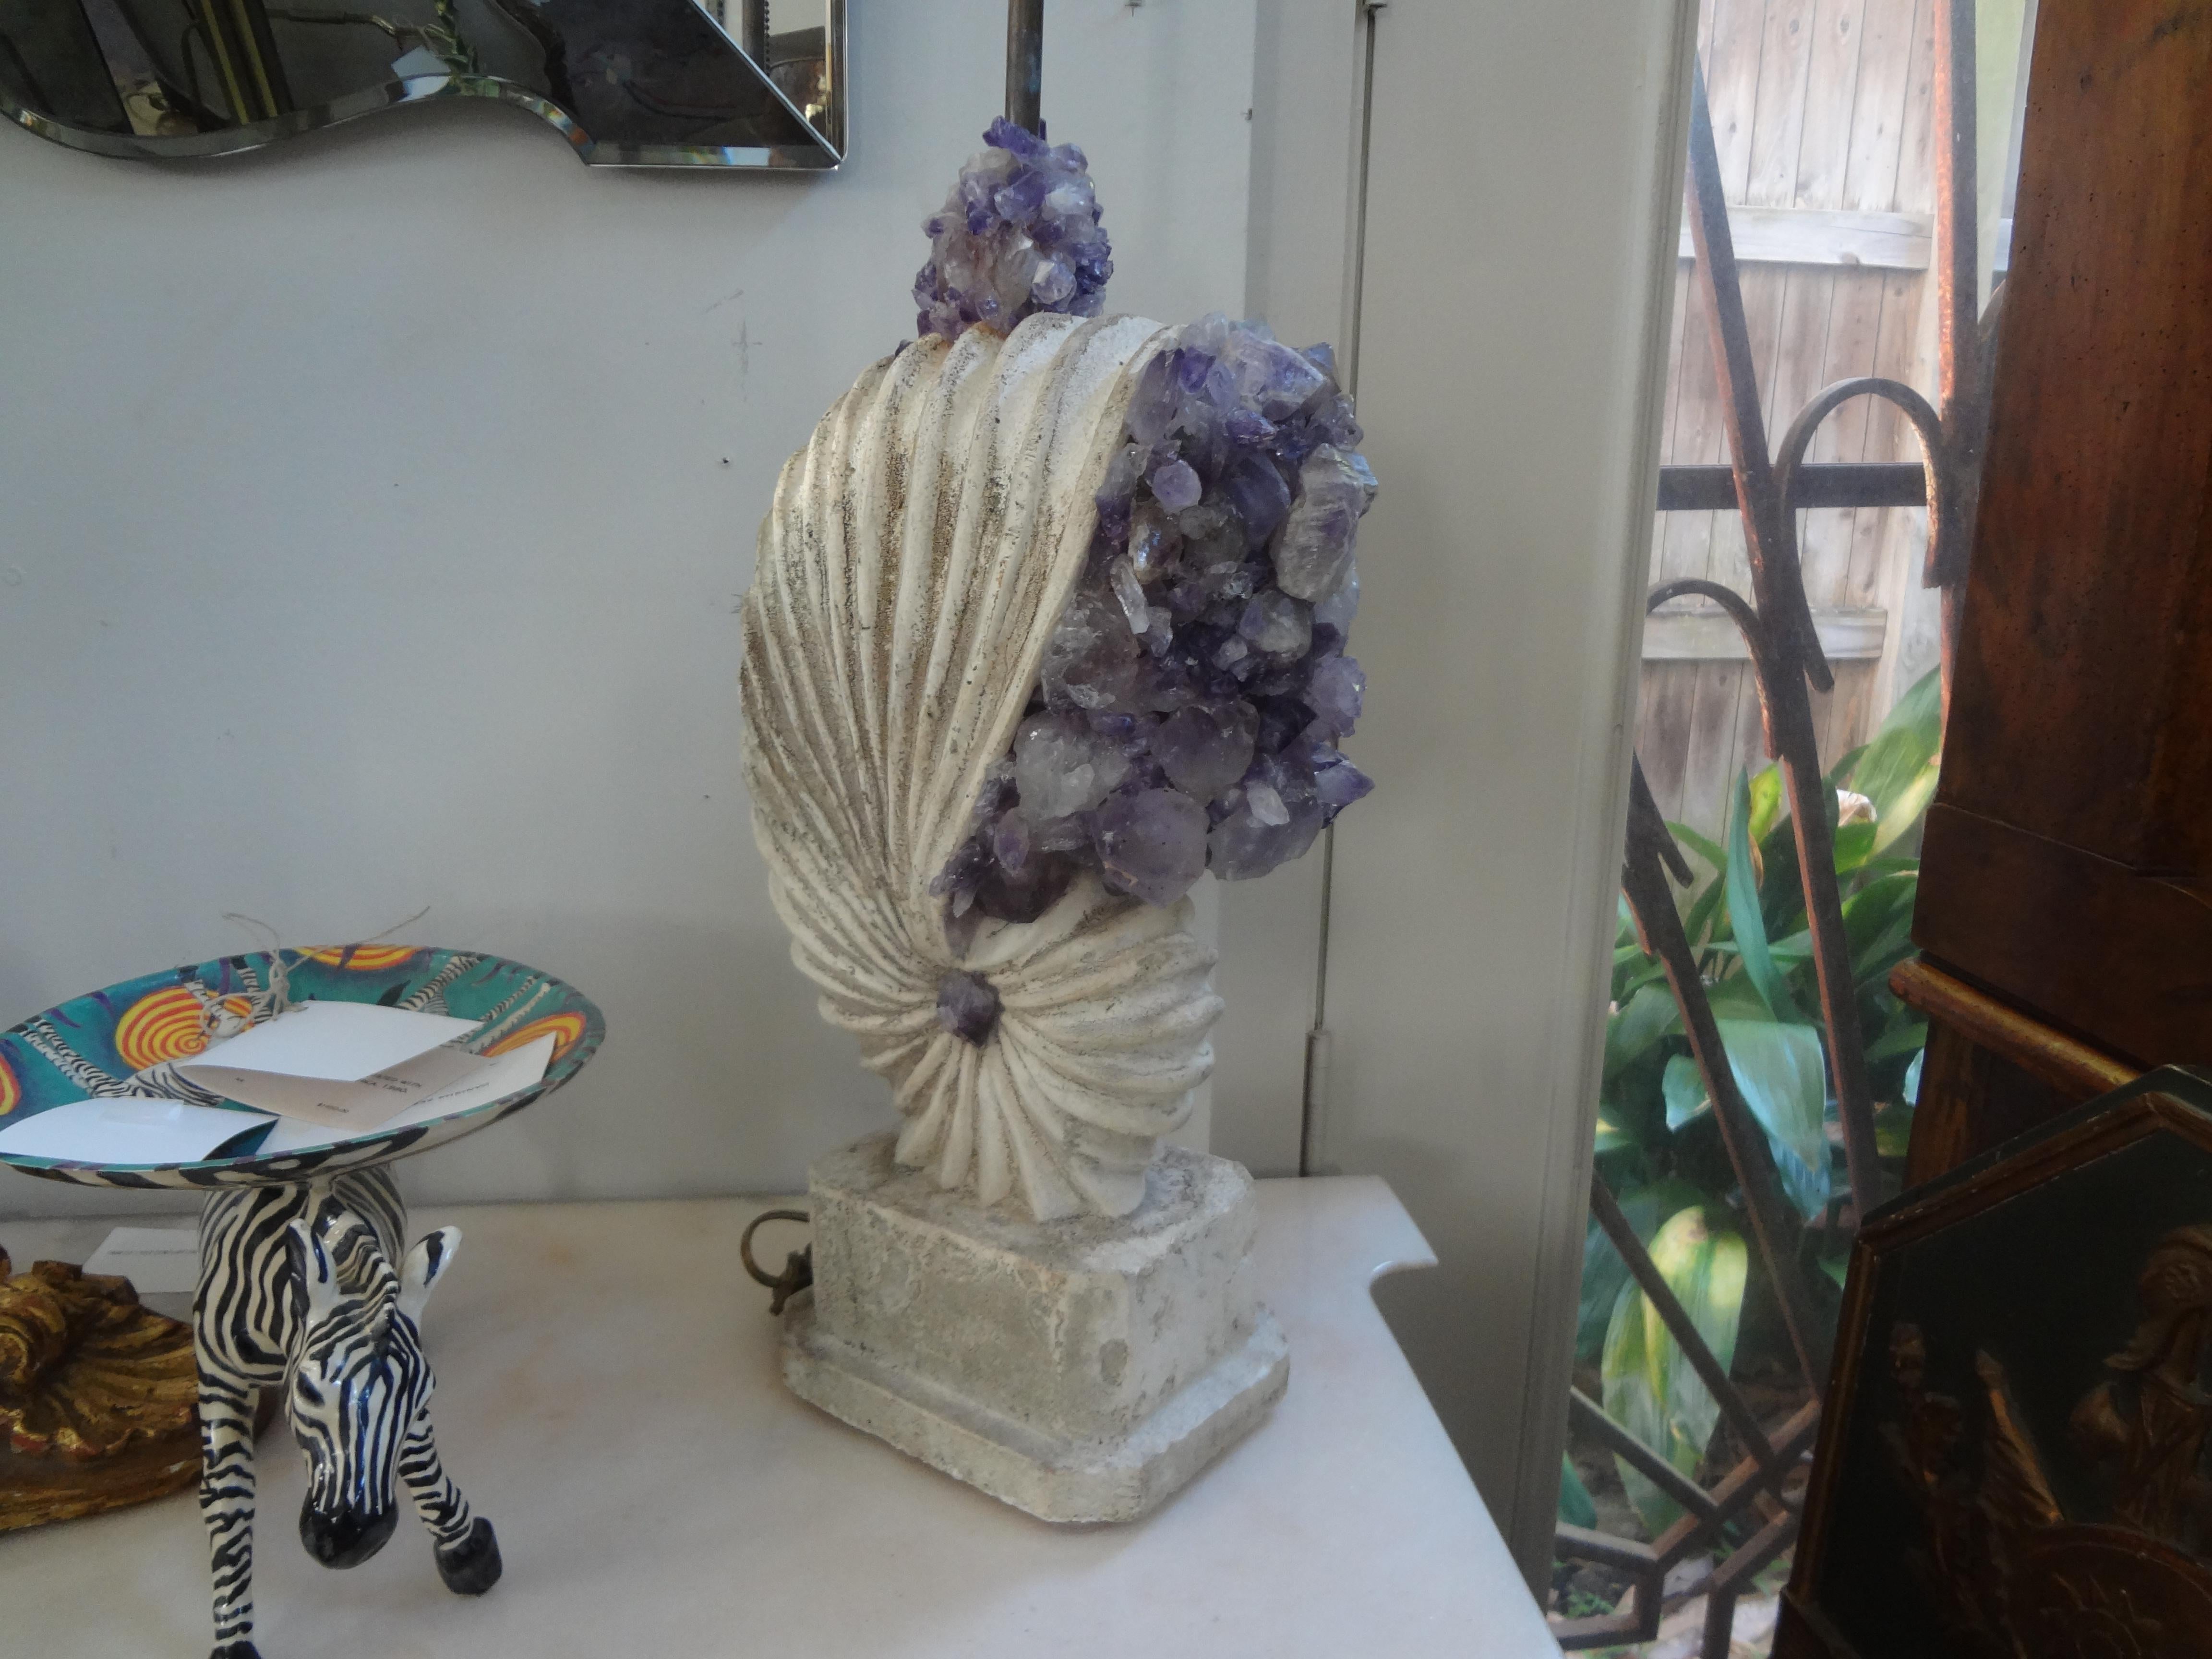 Stone Nautilus shell lamp encrusted with amethyst rock crystals.
Fabulous Hollywood Regency cast stone lamp in the shape of a nautilus shell lamp encrusted with amethyst rock crystals.
This stunning rock crystal lamp has dual Edison sockets. As with